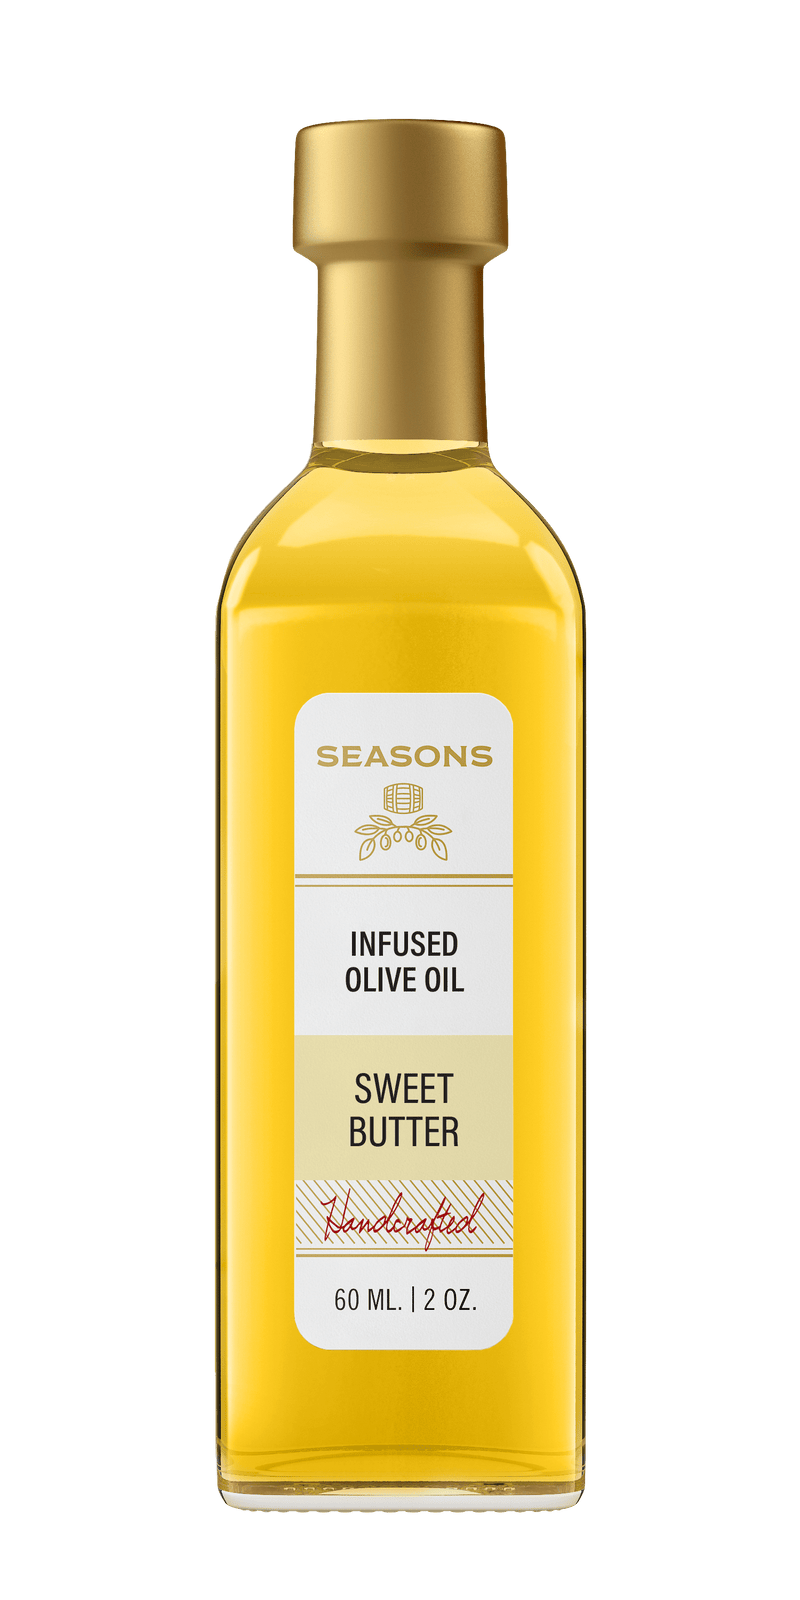 Millpress Imports Infused Olive Oil 60mL Sweet Butter Infused Olive Oil